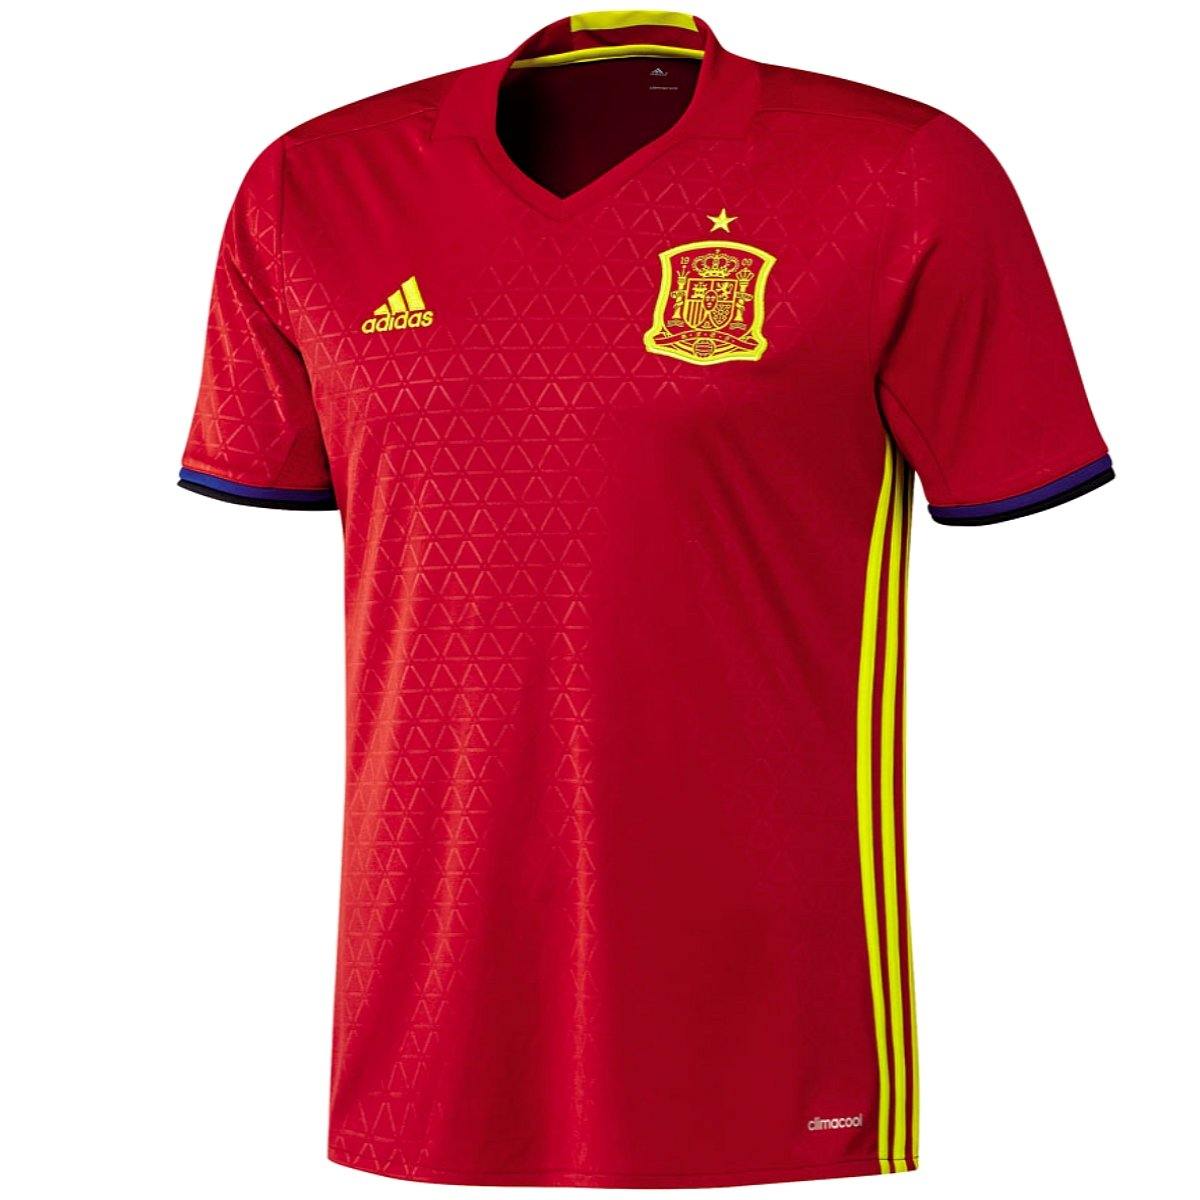 Adidas Spain 2016-17 Home Shirt ((Excellent) S)